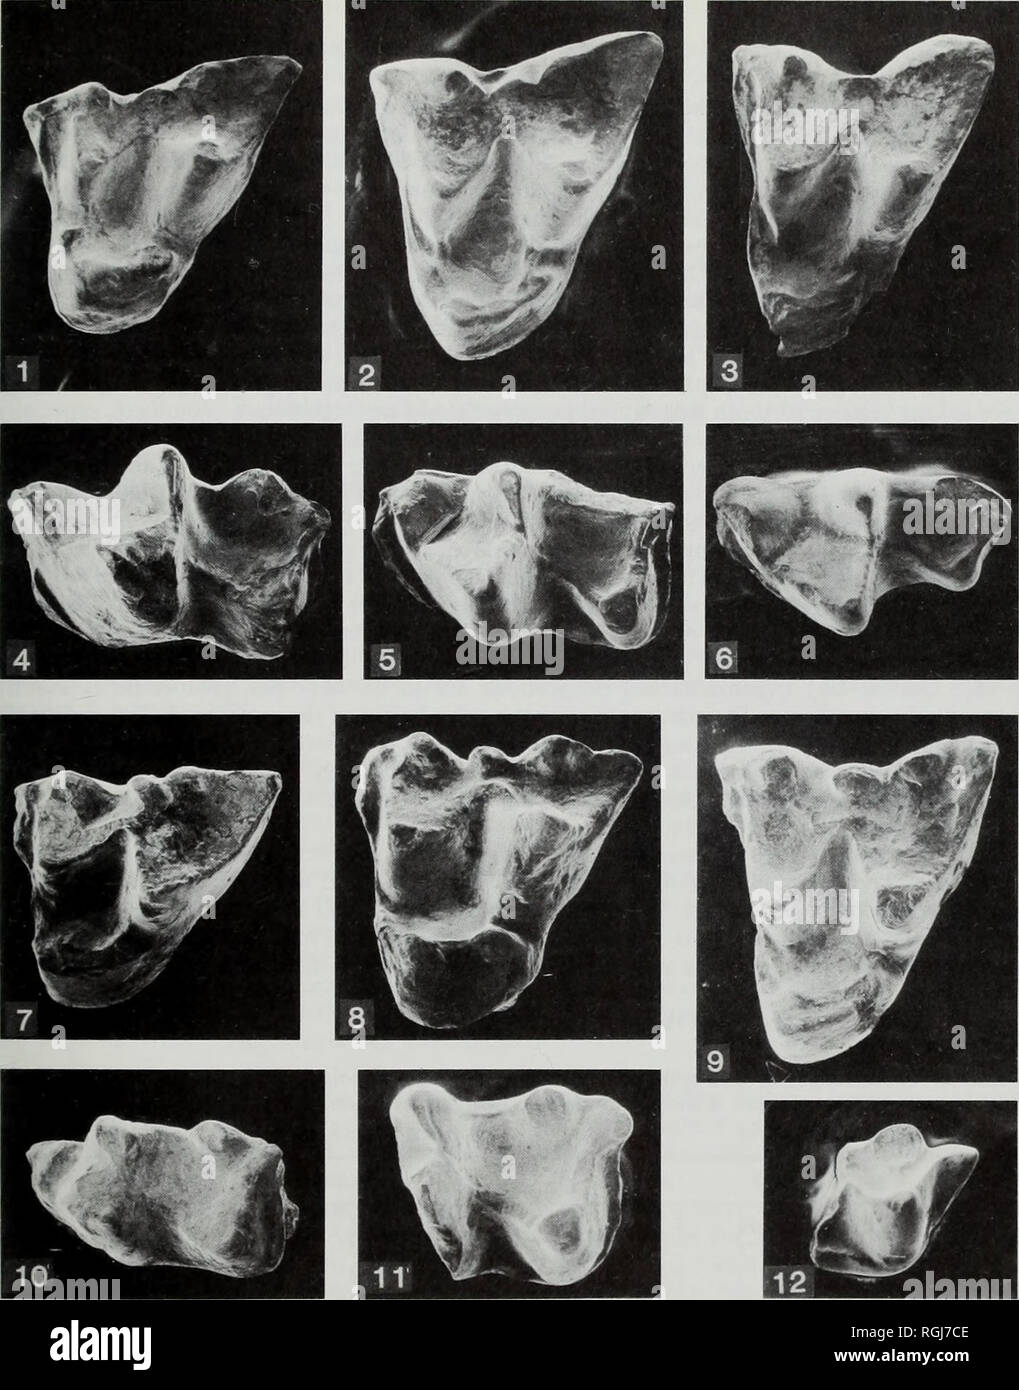 . Bulletin of the British Museum (Natural History), Geology. . Plate 3 Scanning electron micrographs of occlusal views of molars of Amphiperatherium from Creechbarrow. Figs 1-6 Amphiperatherium aff. goethei Crochet, x 24. Fig. 1, right M1 (reversed) (M37110). Fig. 2, right M2 (reversed) (M35632). Fig. 3, left M3 (M35633). Fig. 4, left M2 (M37112). Fig. 5, left M3 (M35637). Fig. 6, left M4 (M35638). See p. 216. Figs 7-12 Amphiperatherium fontense Crochet, x 16. Fig. 7, left M1 (M35390). Fig. 8, left M2 (M35602). Fig. 9, right M3 (reversed) (M37093). Fig. 10, left M, (M35612). Fig. 11, left M2/3 Stock Photo